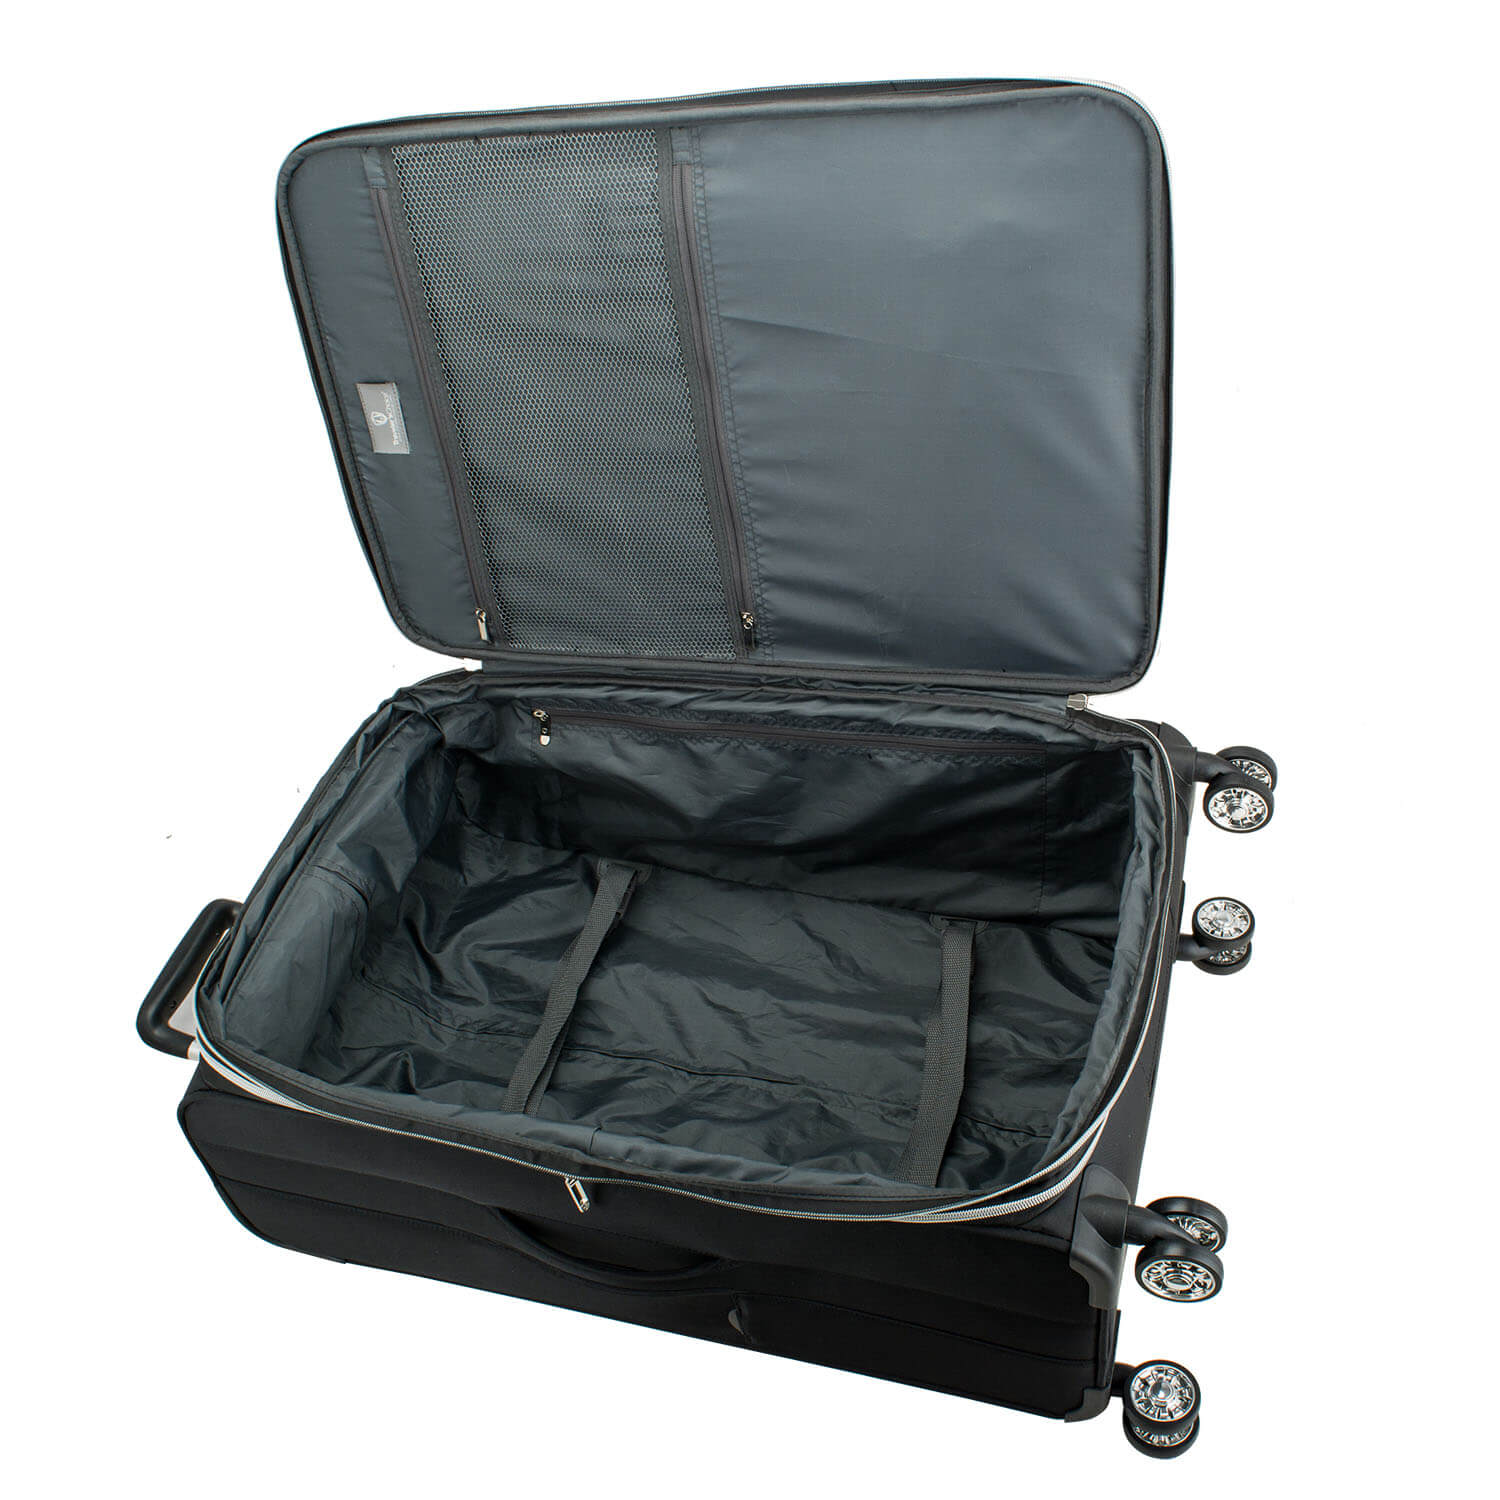 An image of the interior of a gray luggage.